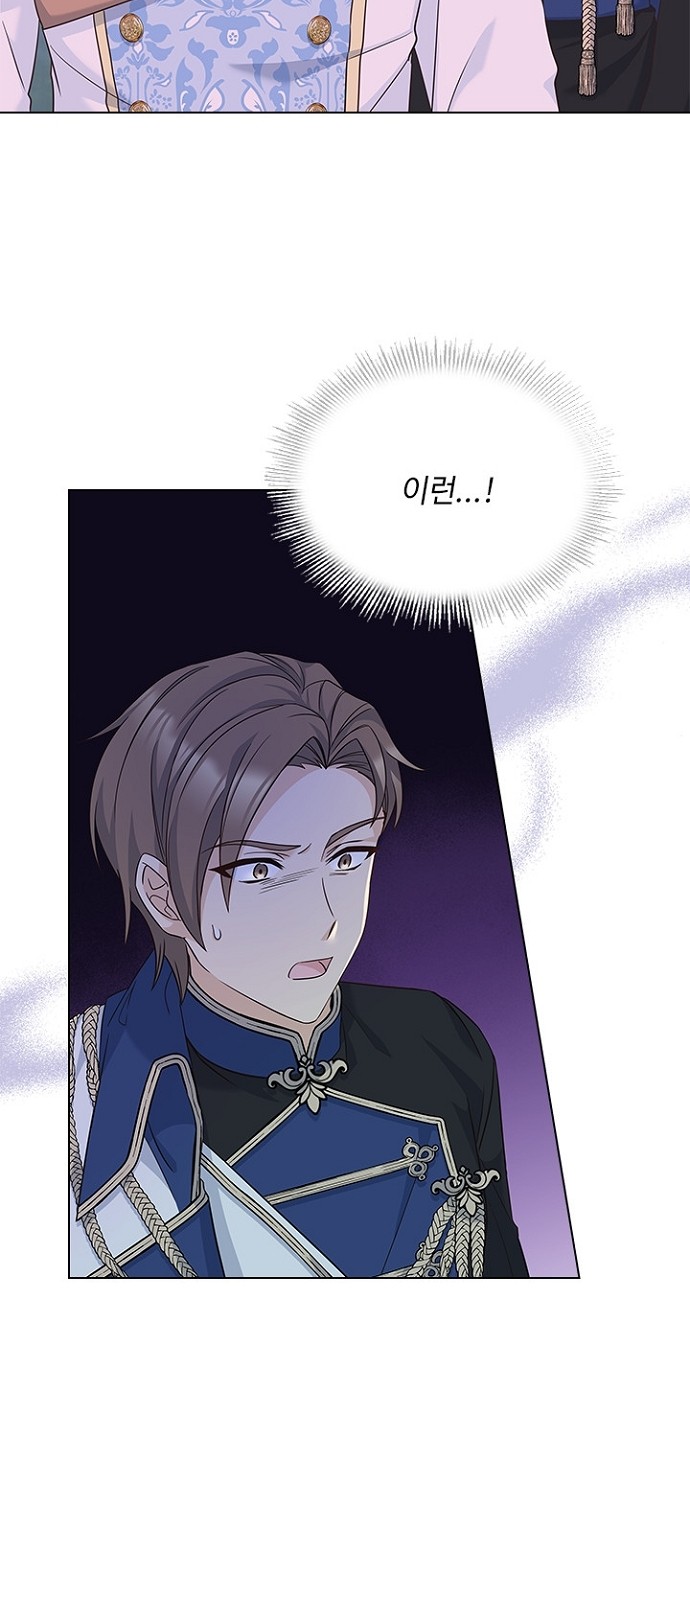 His Majesty's Proposal (A Night With the Emperor) - Chapter 59 - Page 2